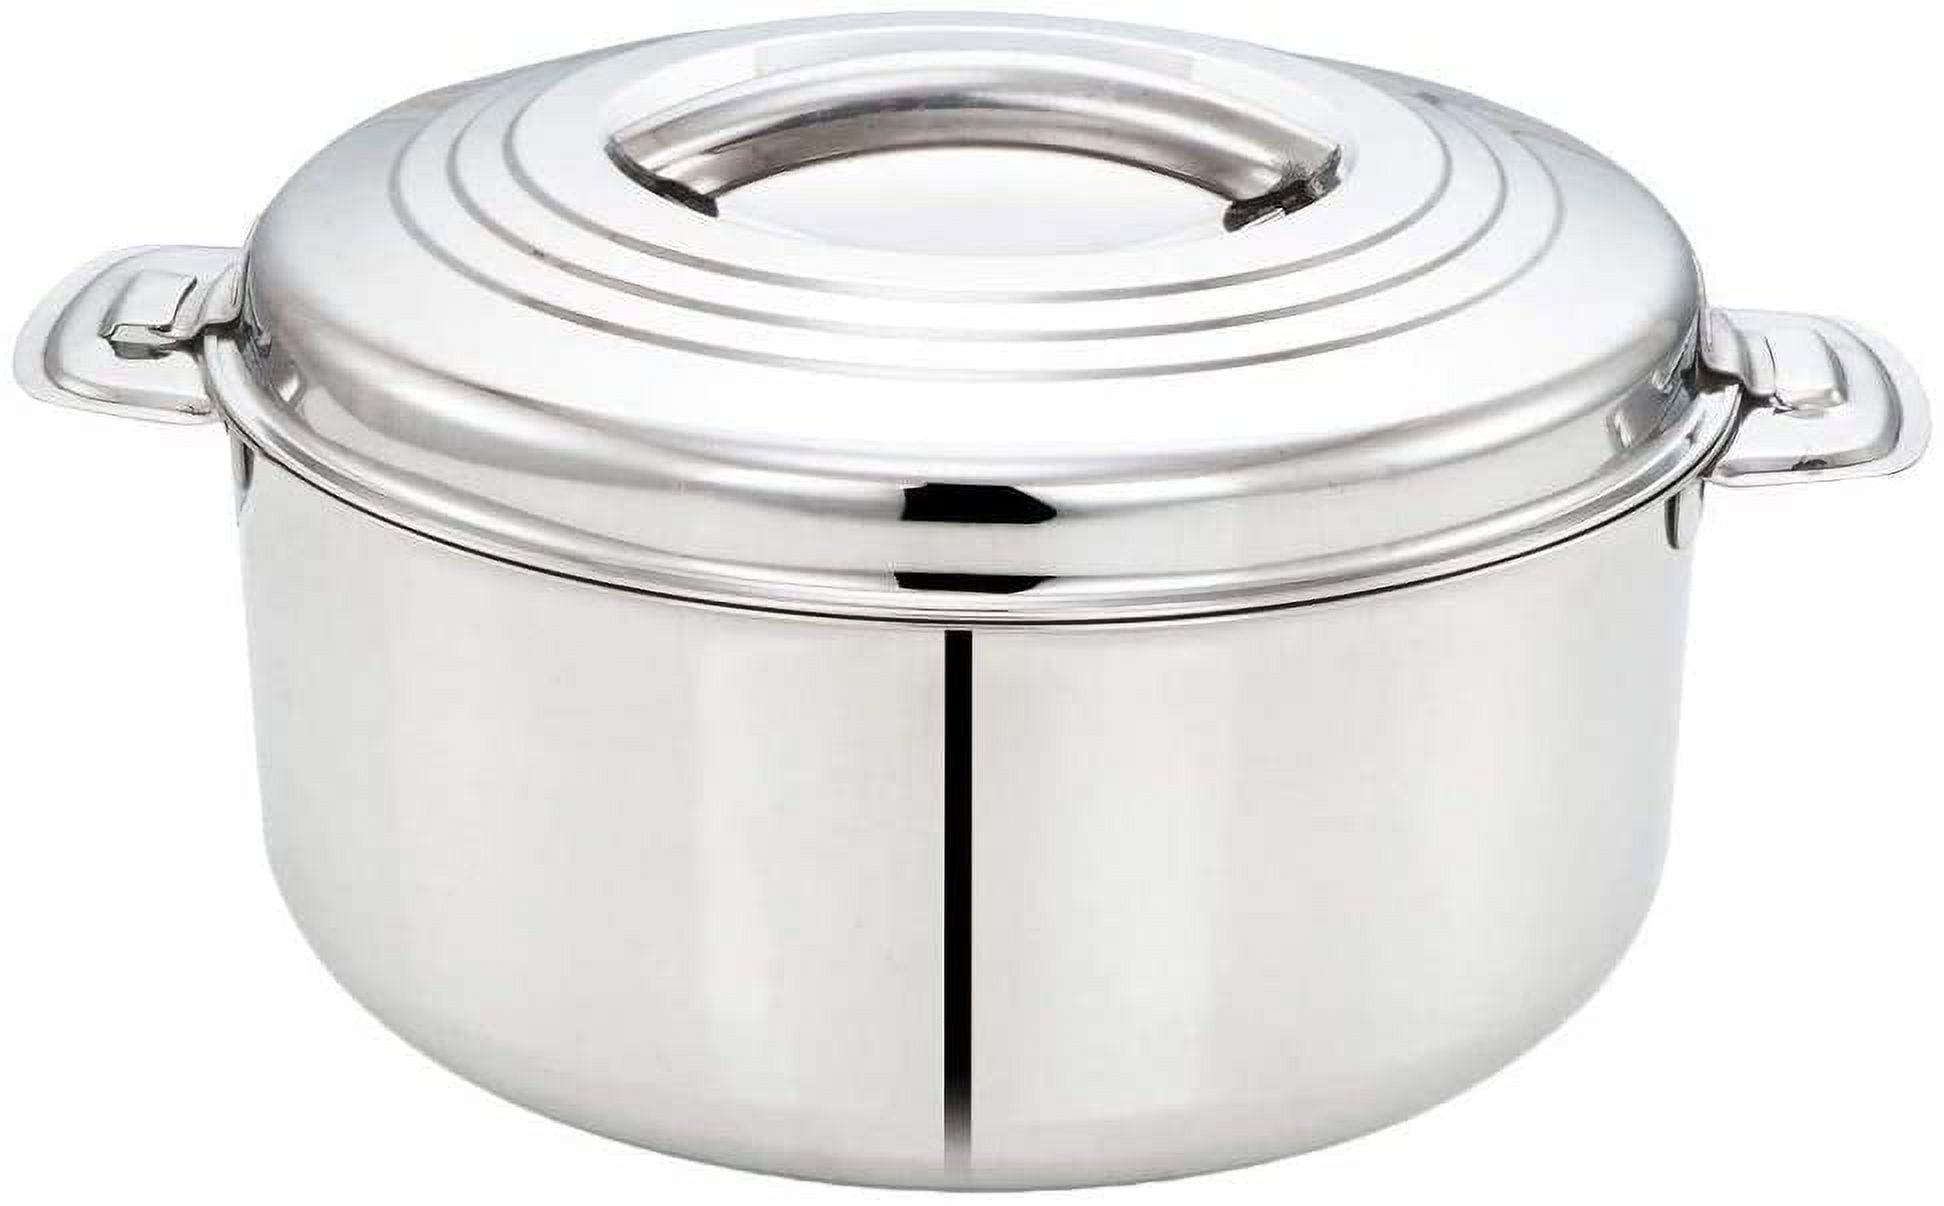 Stainless Steel Hot Pot Insulated Food Warmer Hammered Roti Rice Tortilla